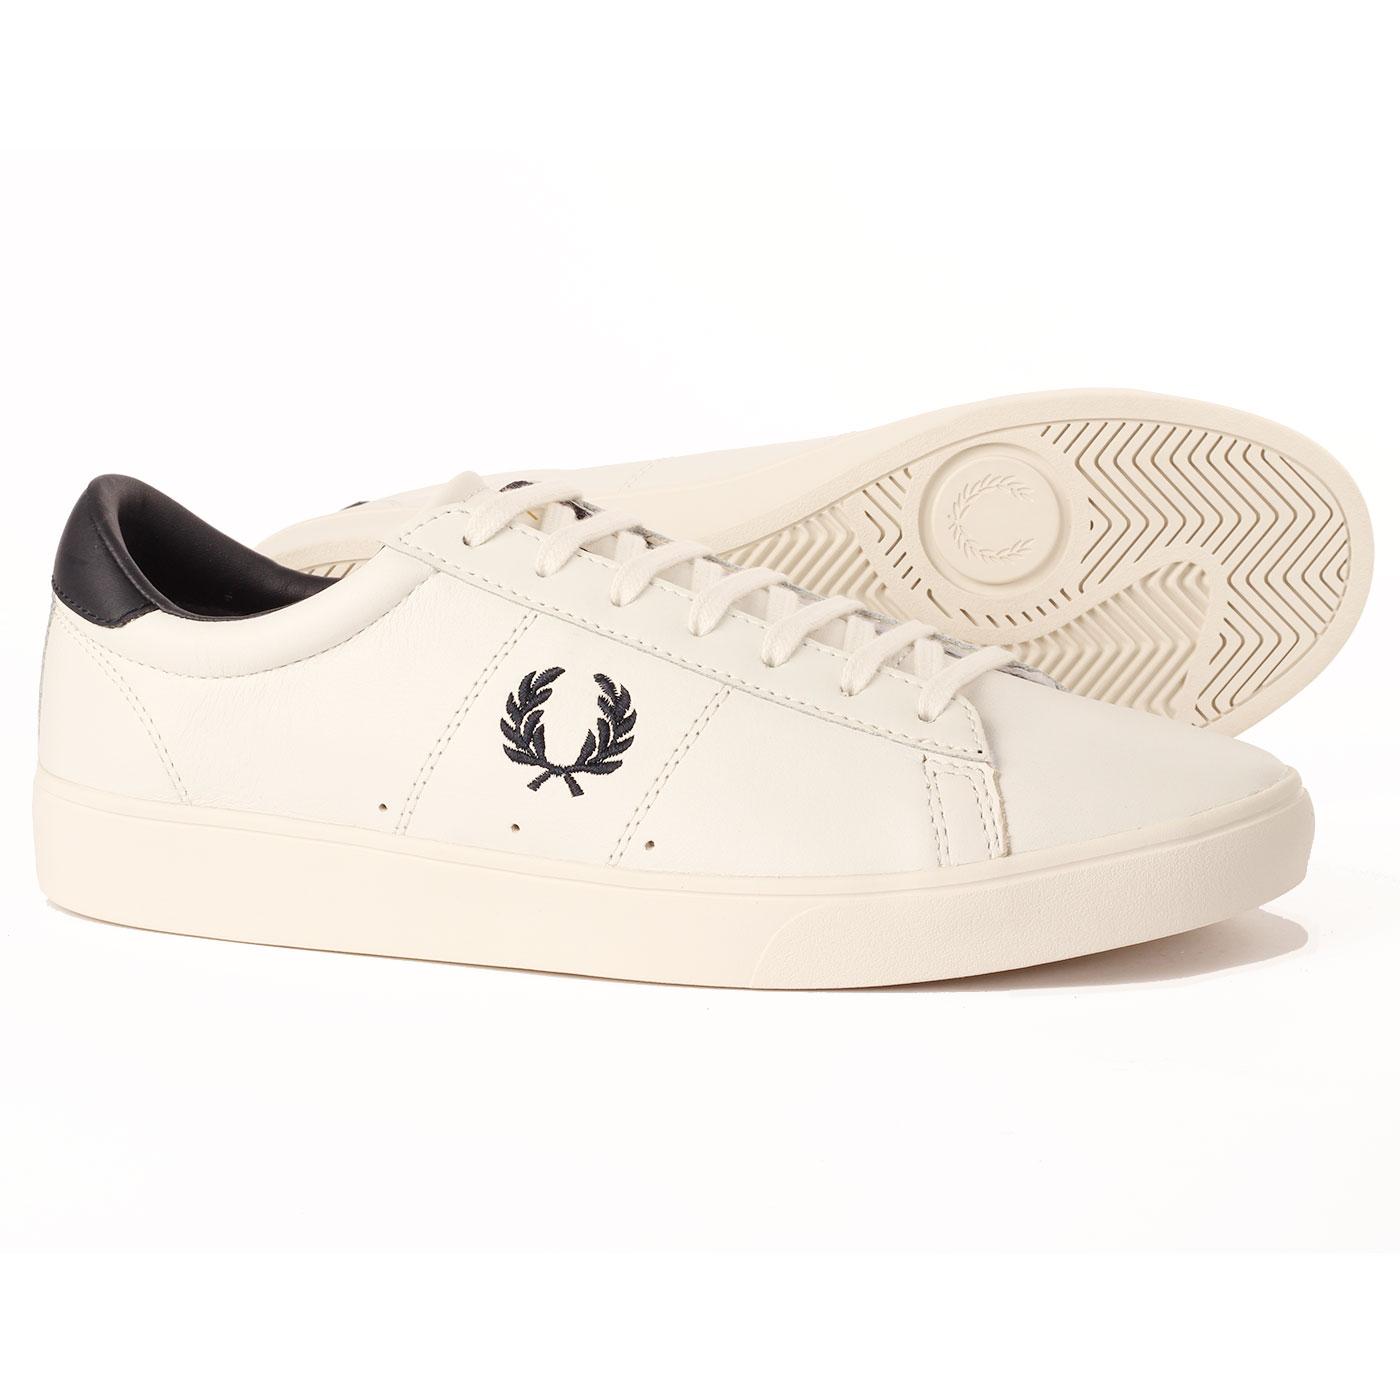 FRED PERRY 'Spencer' Men's Retro Leather Trainers Porcelain